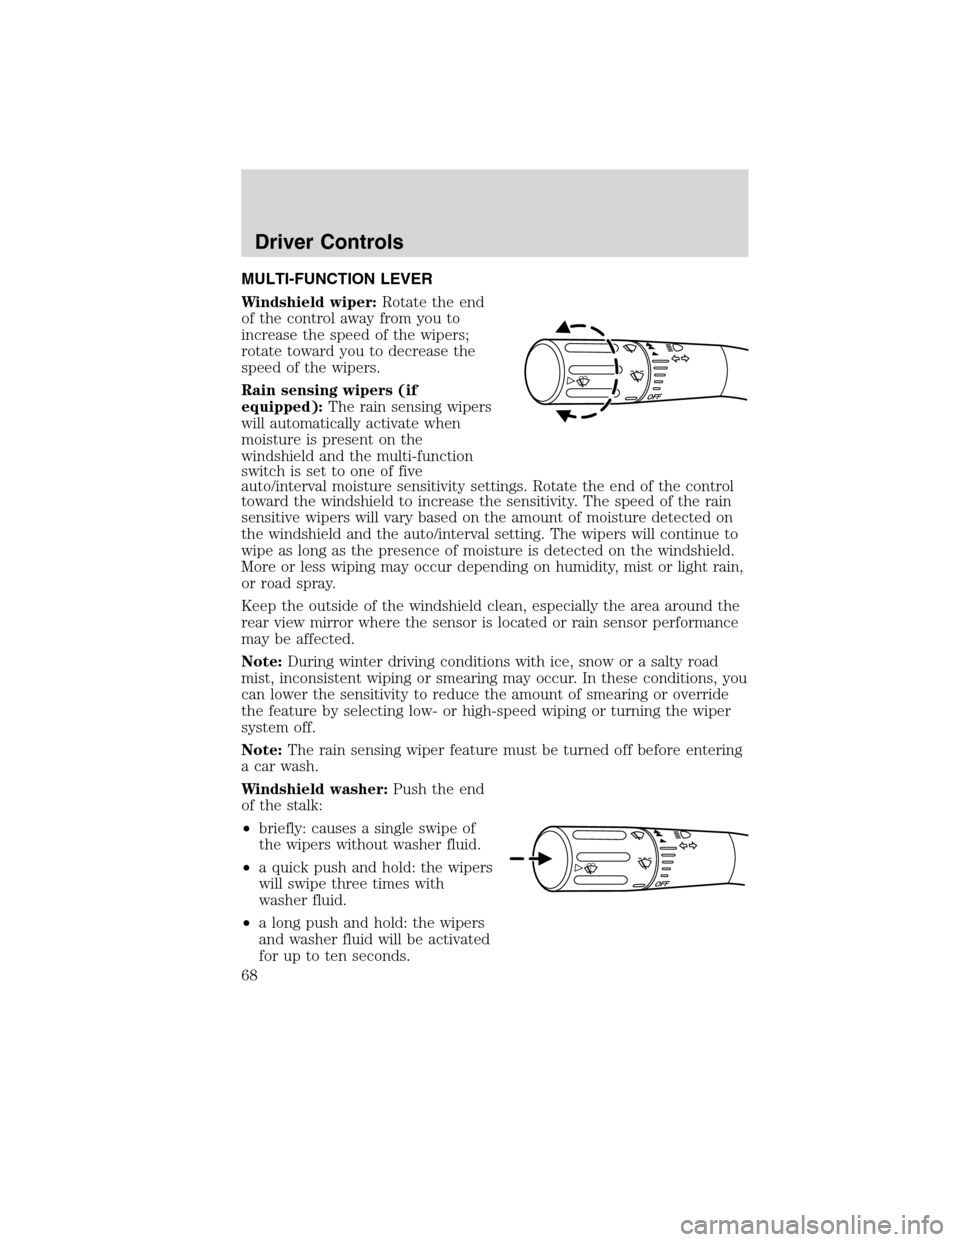 LINCOLN MKS 2010 User Guide MULTI-FUNCTION LEVER
Windshield wiper:Rotate the end
of the control away from you to
increase the speed of the wipers;
rotate toward you to decrease the
speed of the wipers.
Rain sensing wipers (if
eq